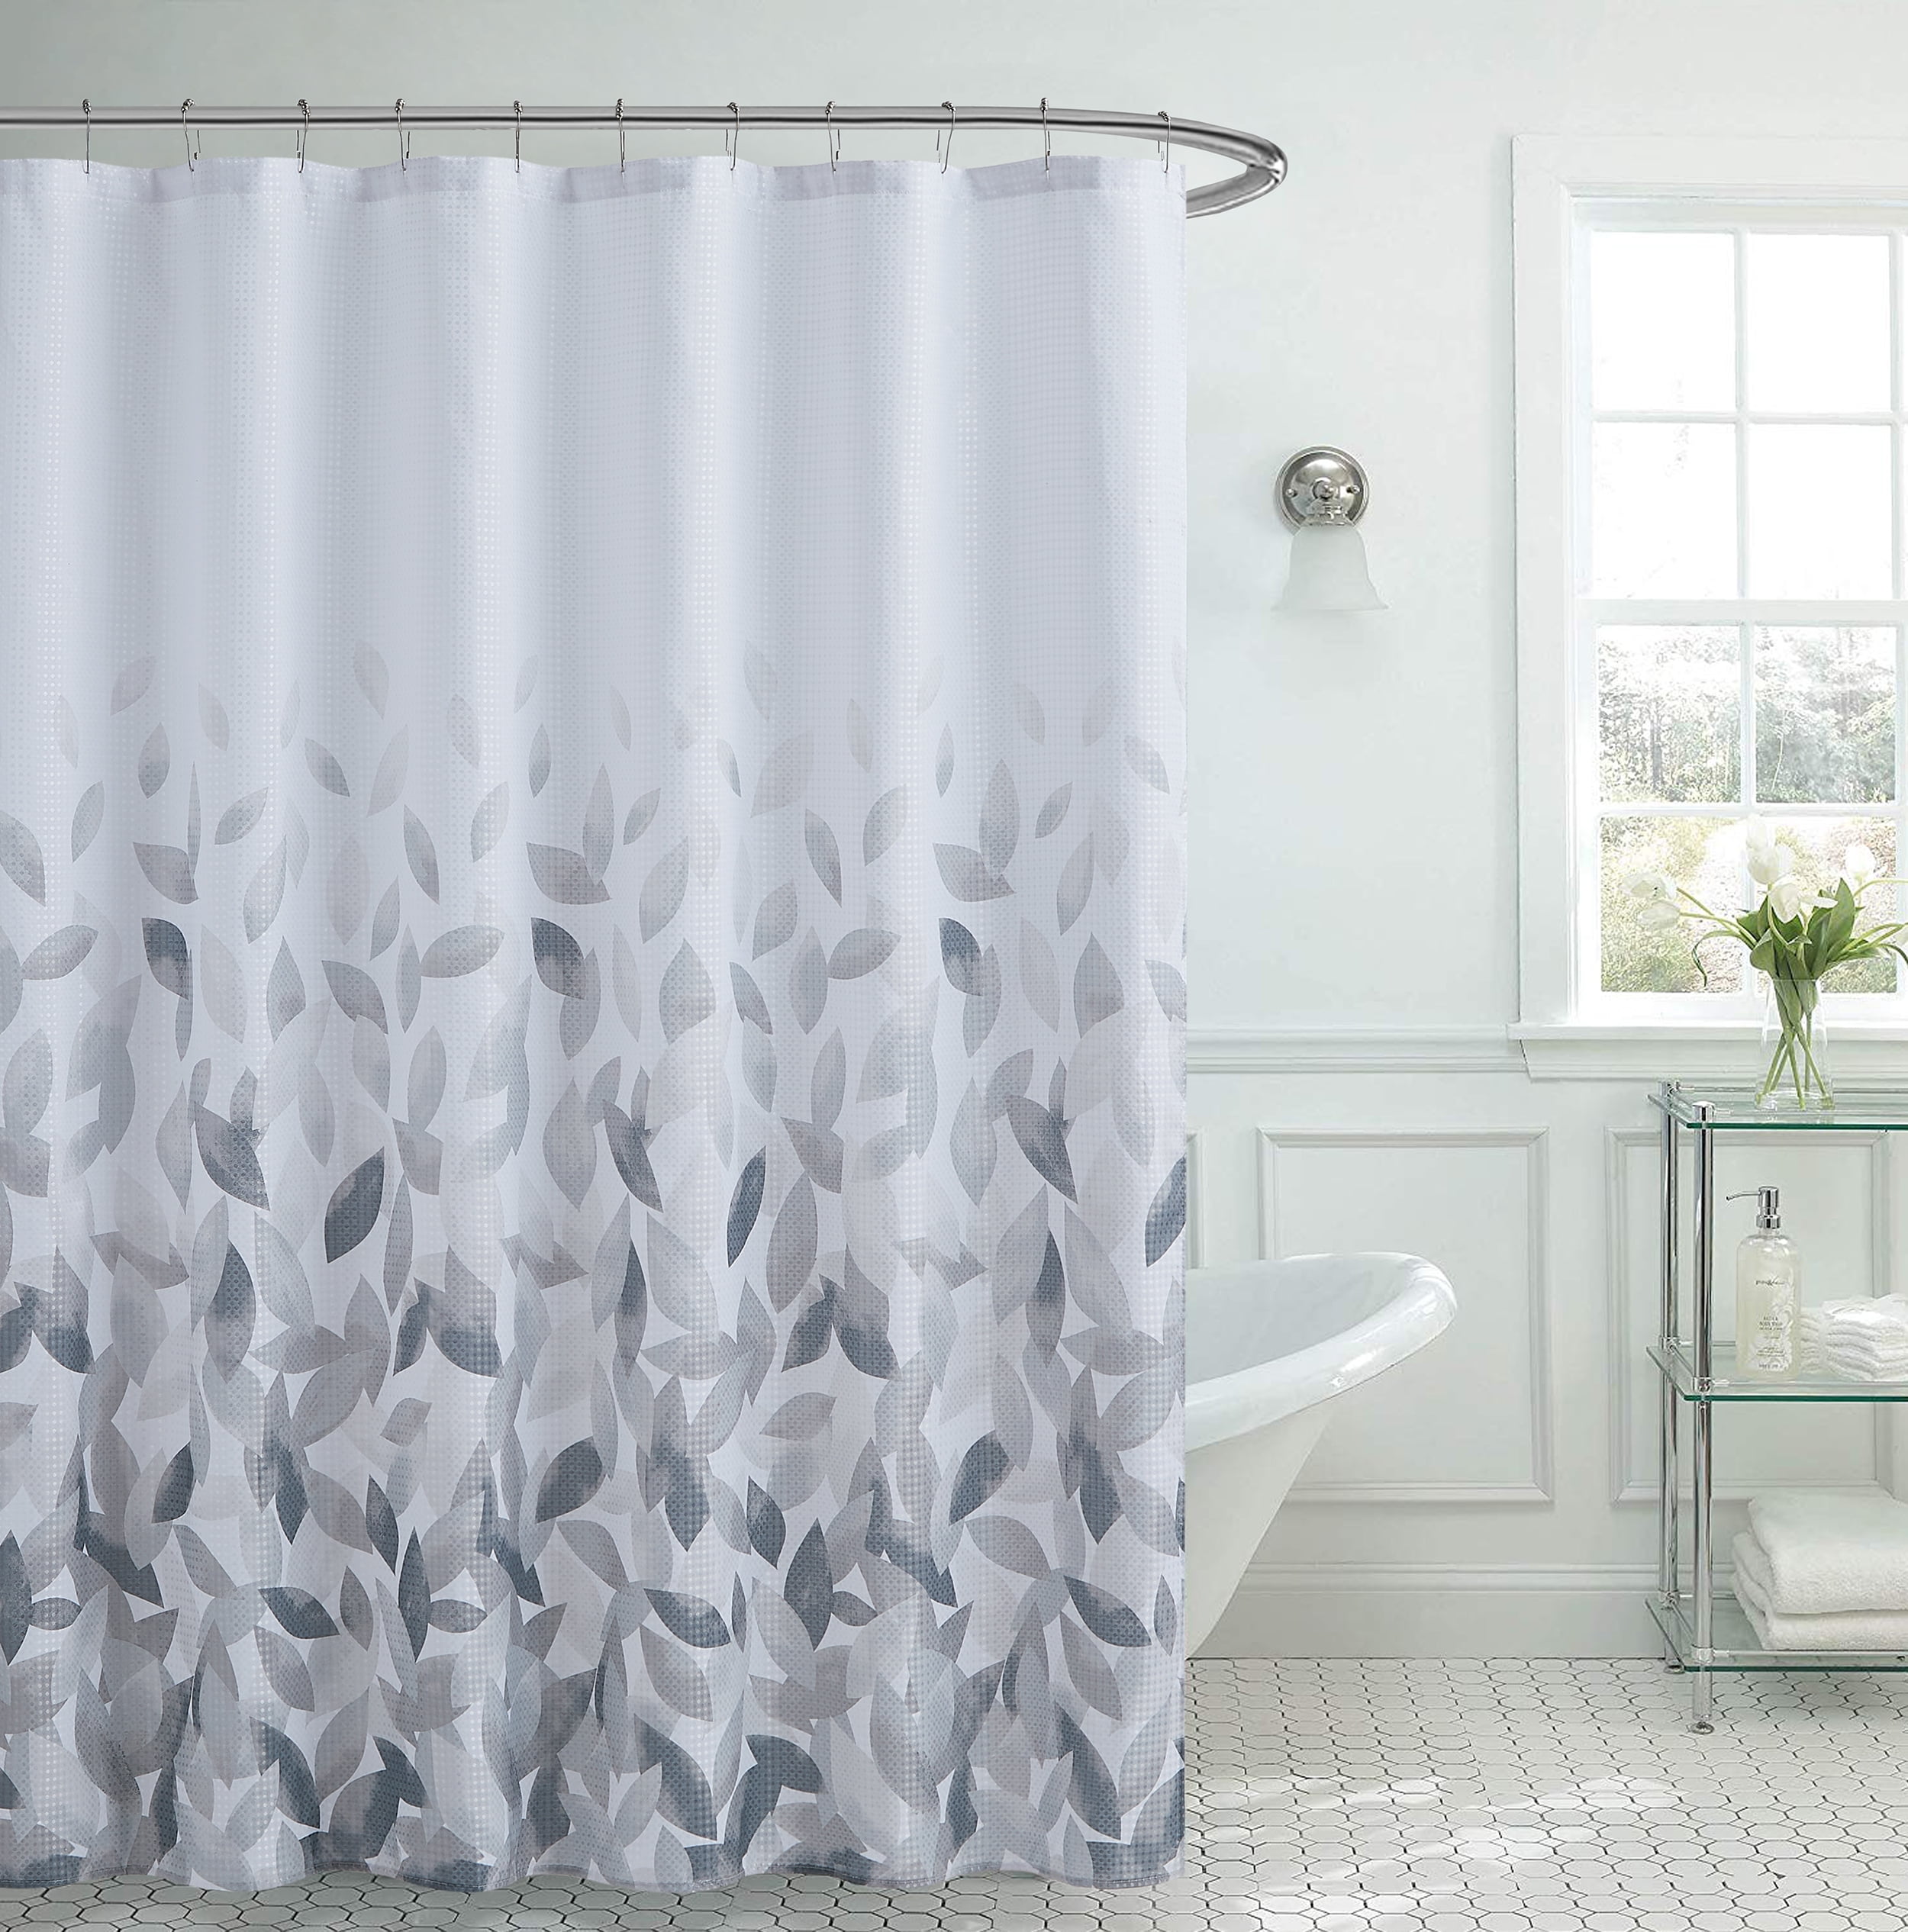 71*71" Pin-up Girl Come On In US Bathroom Fabric Bath Shower Curtain Home Decor 